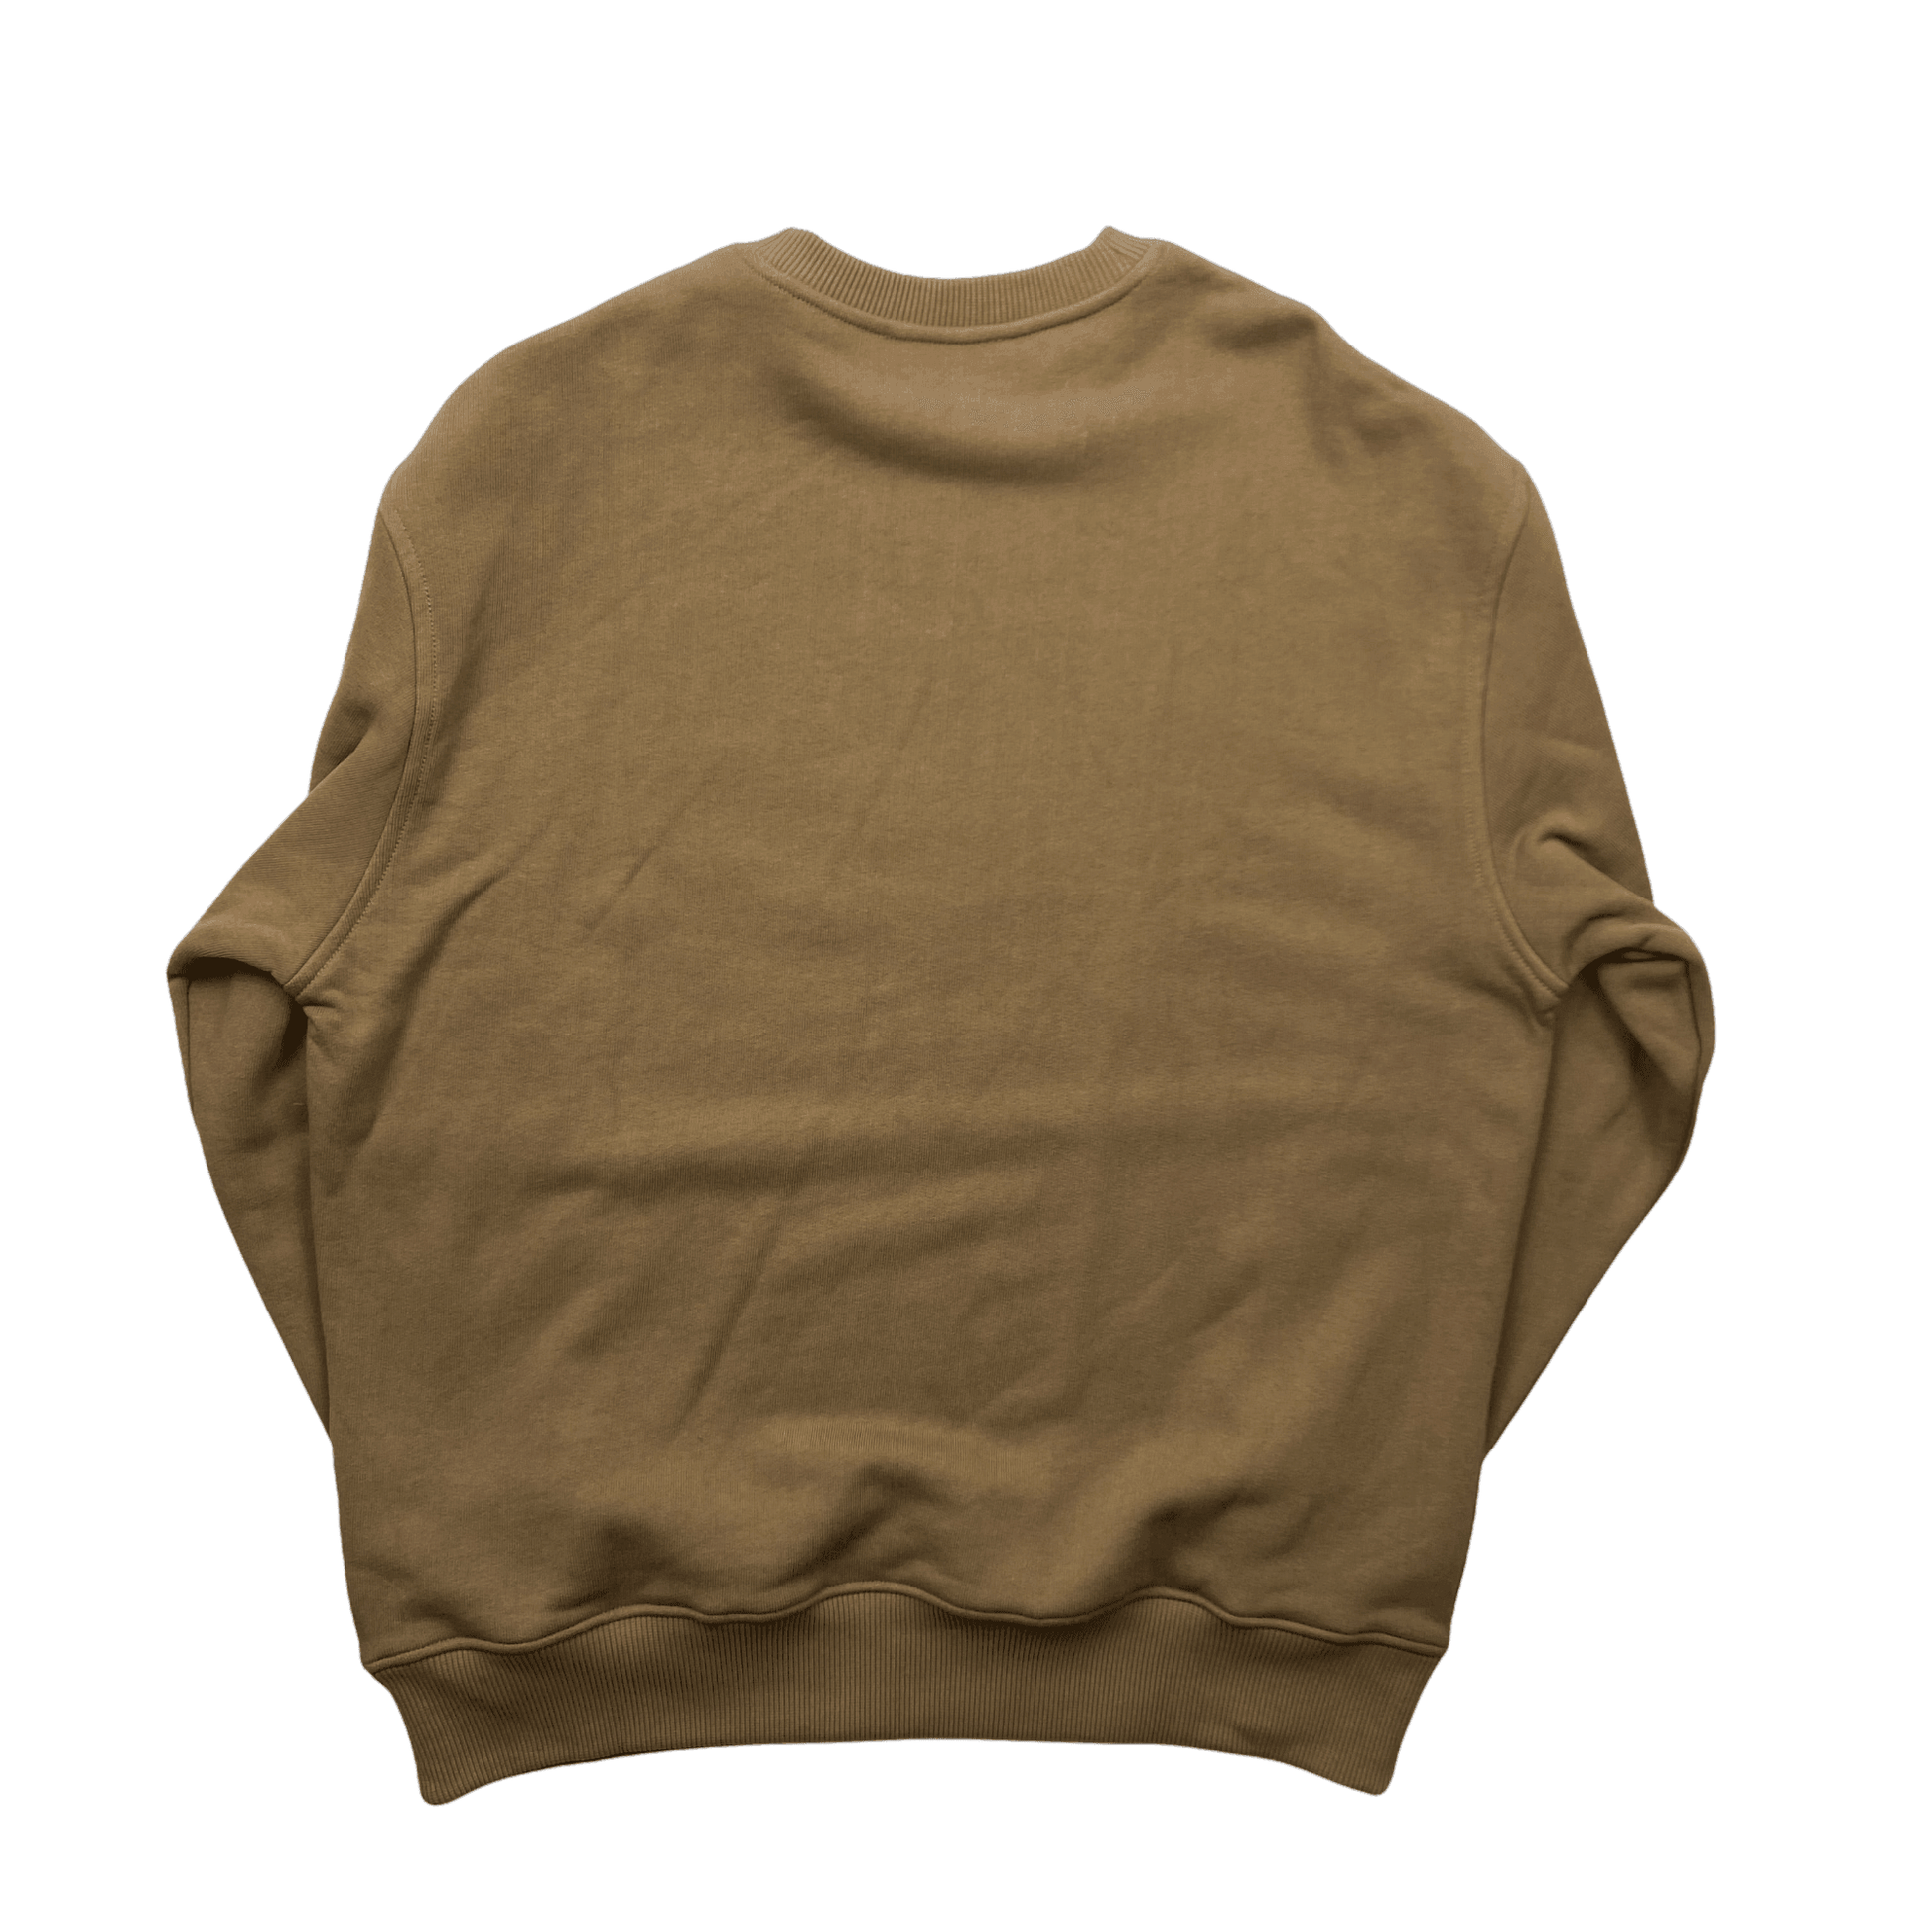 Brown Acne Studios Forban Oversized Sweatshirt - Medium (Recommended Size - Extra Large) - The Streetwear Studio